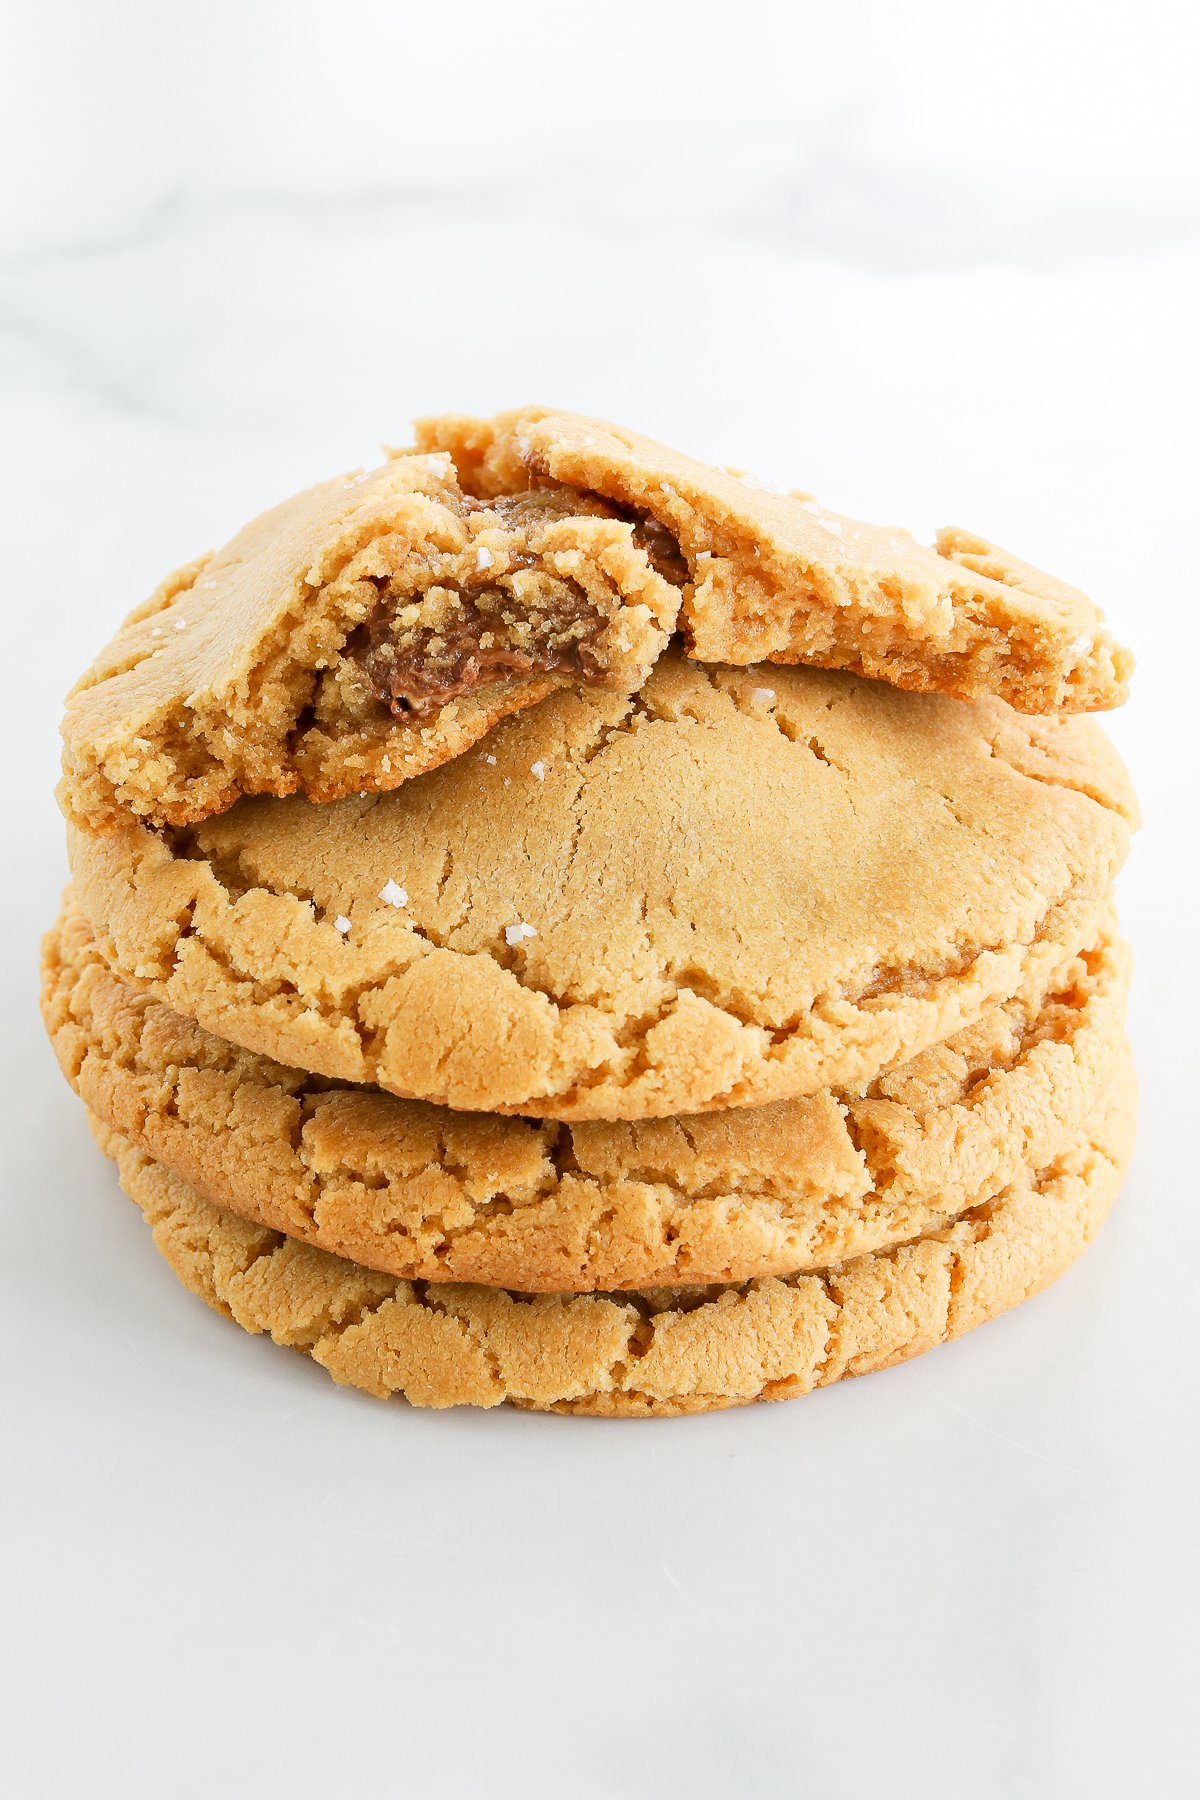 A stack of peanut butter stuffed cookies with a bite taken out of them.